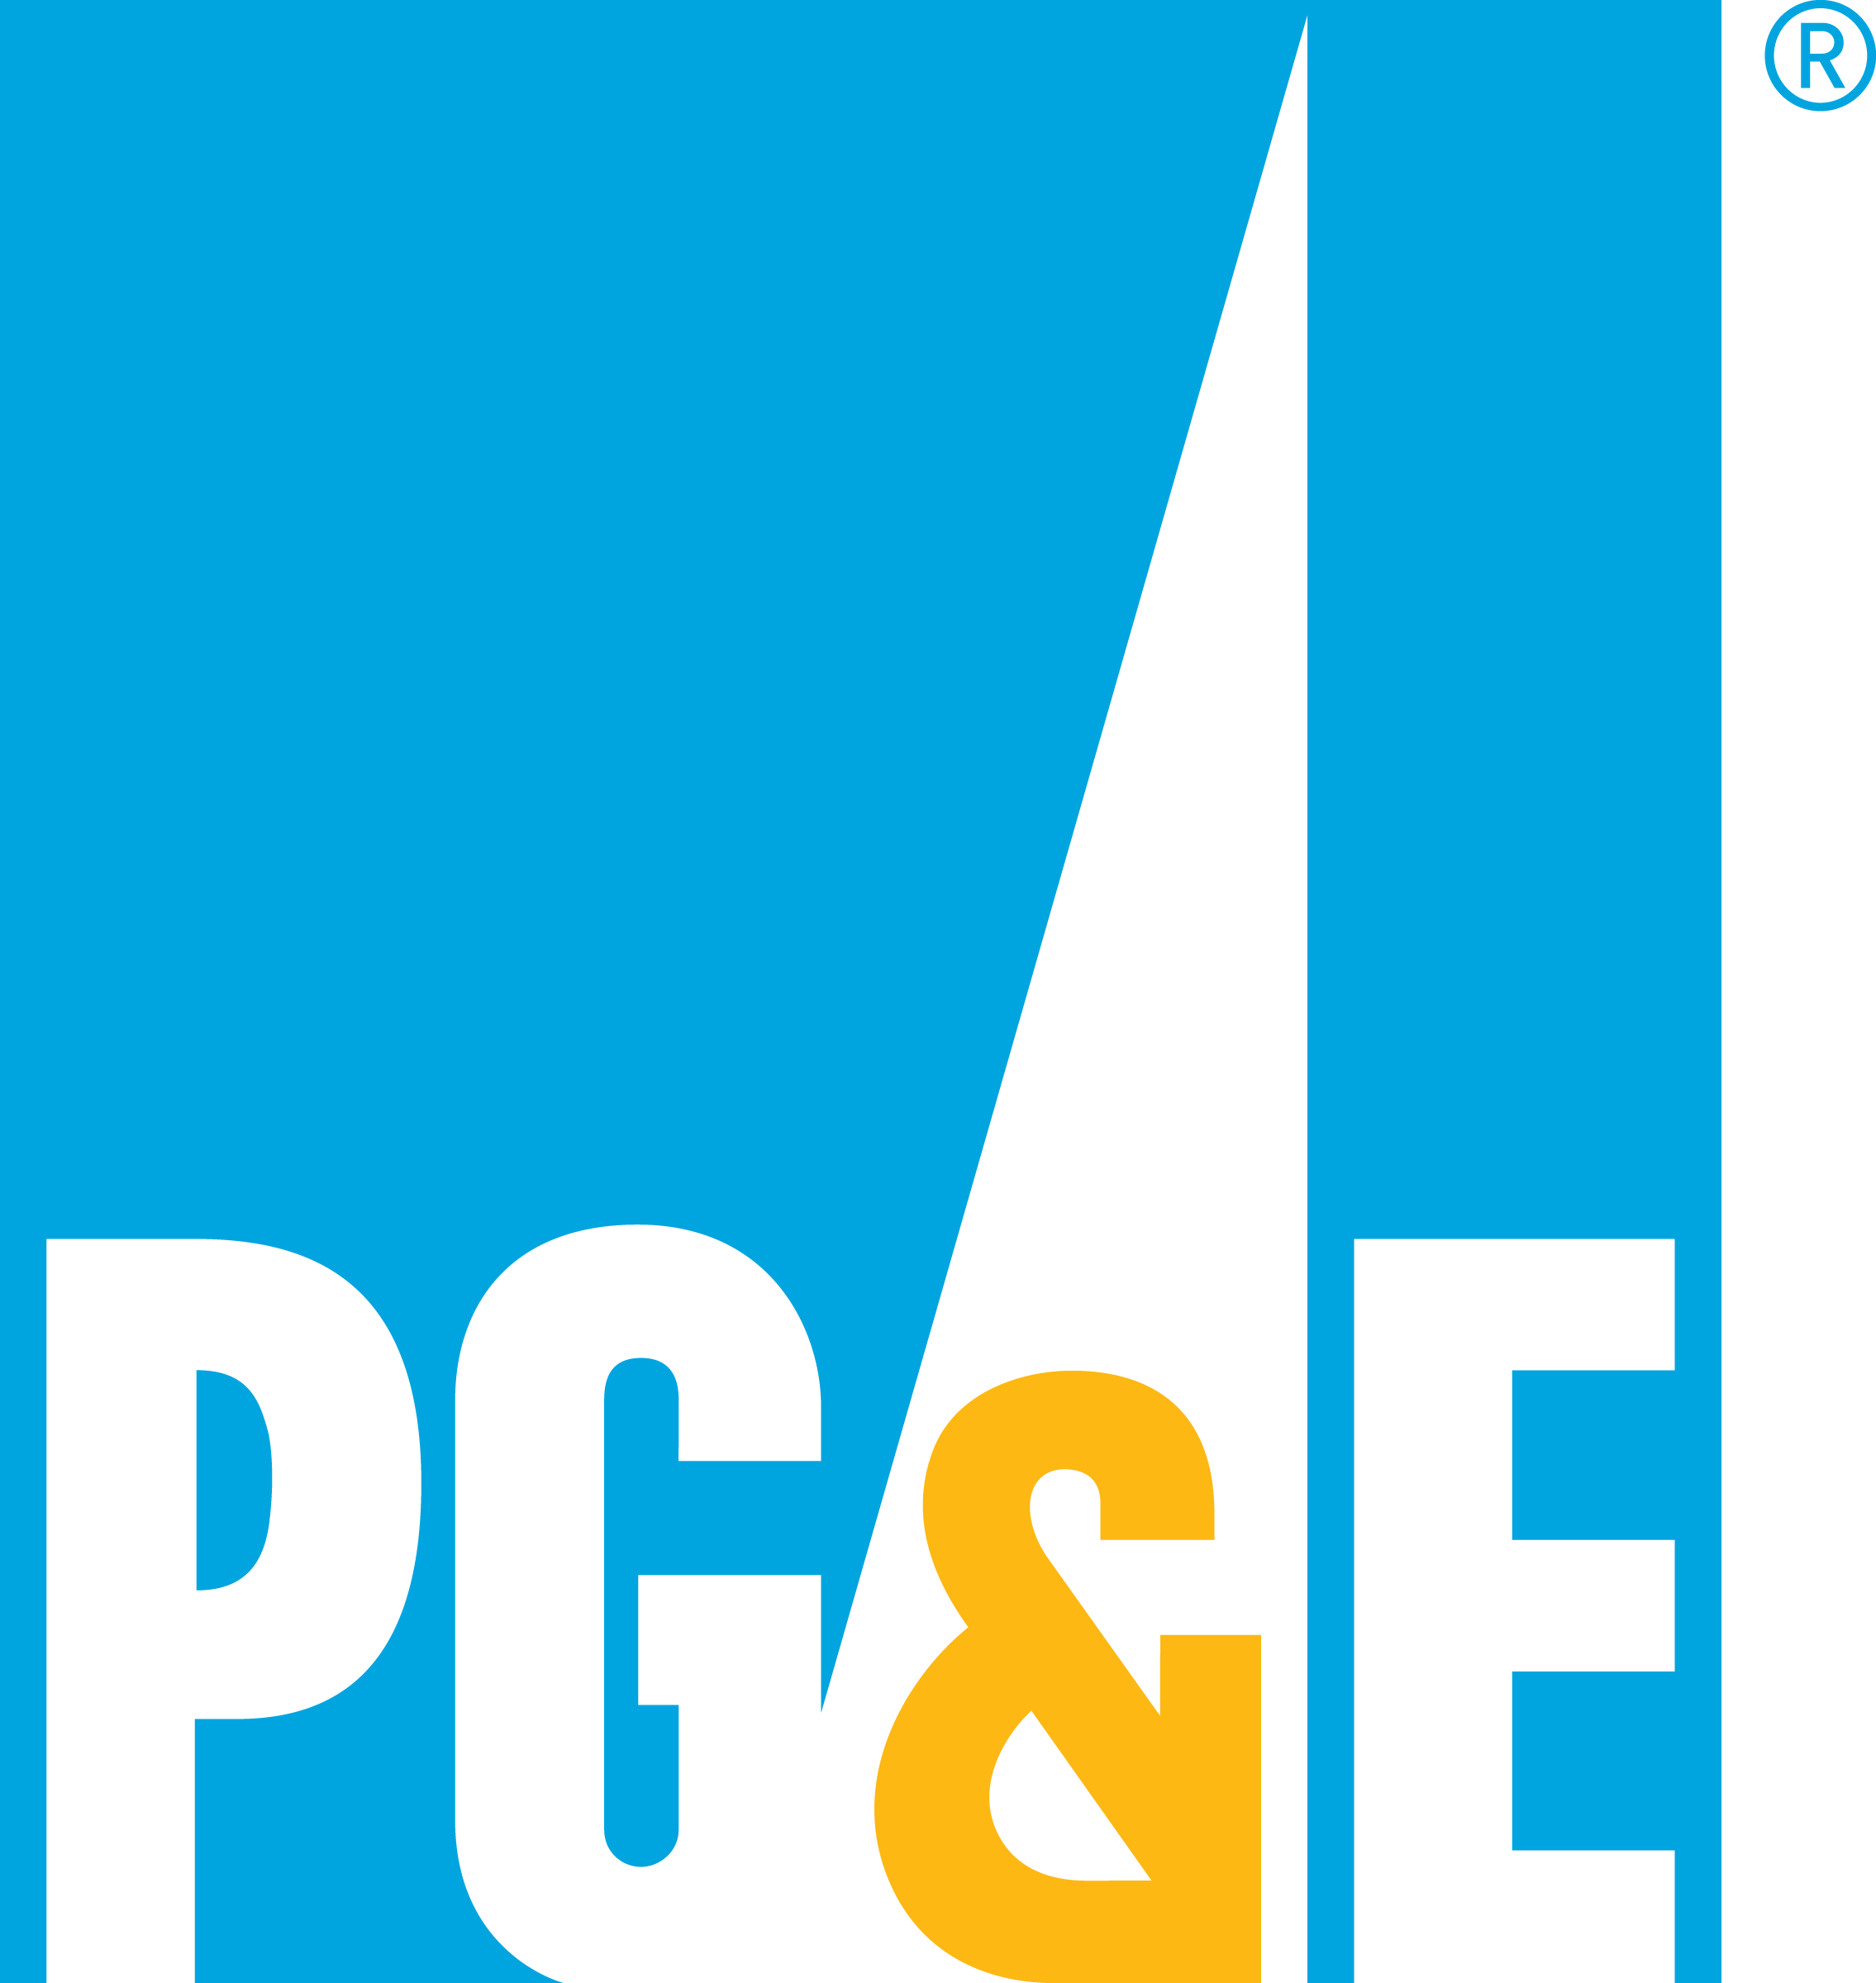 PG&E Logo - PG&E, Pacific Gas and Electric - Gas and power company for California